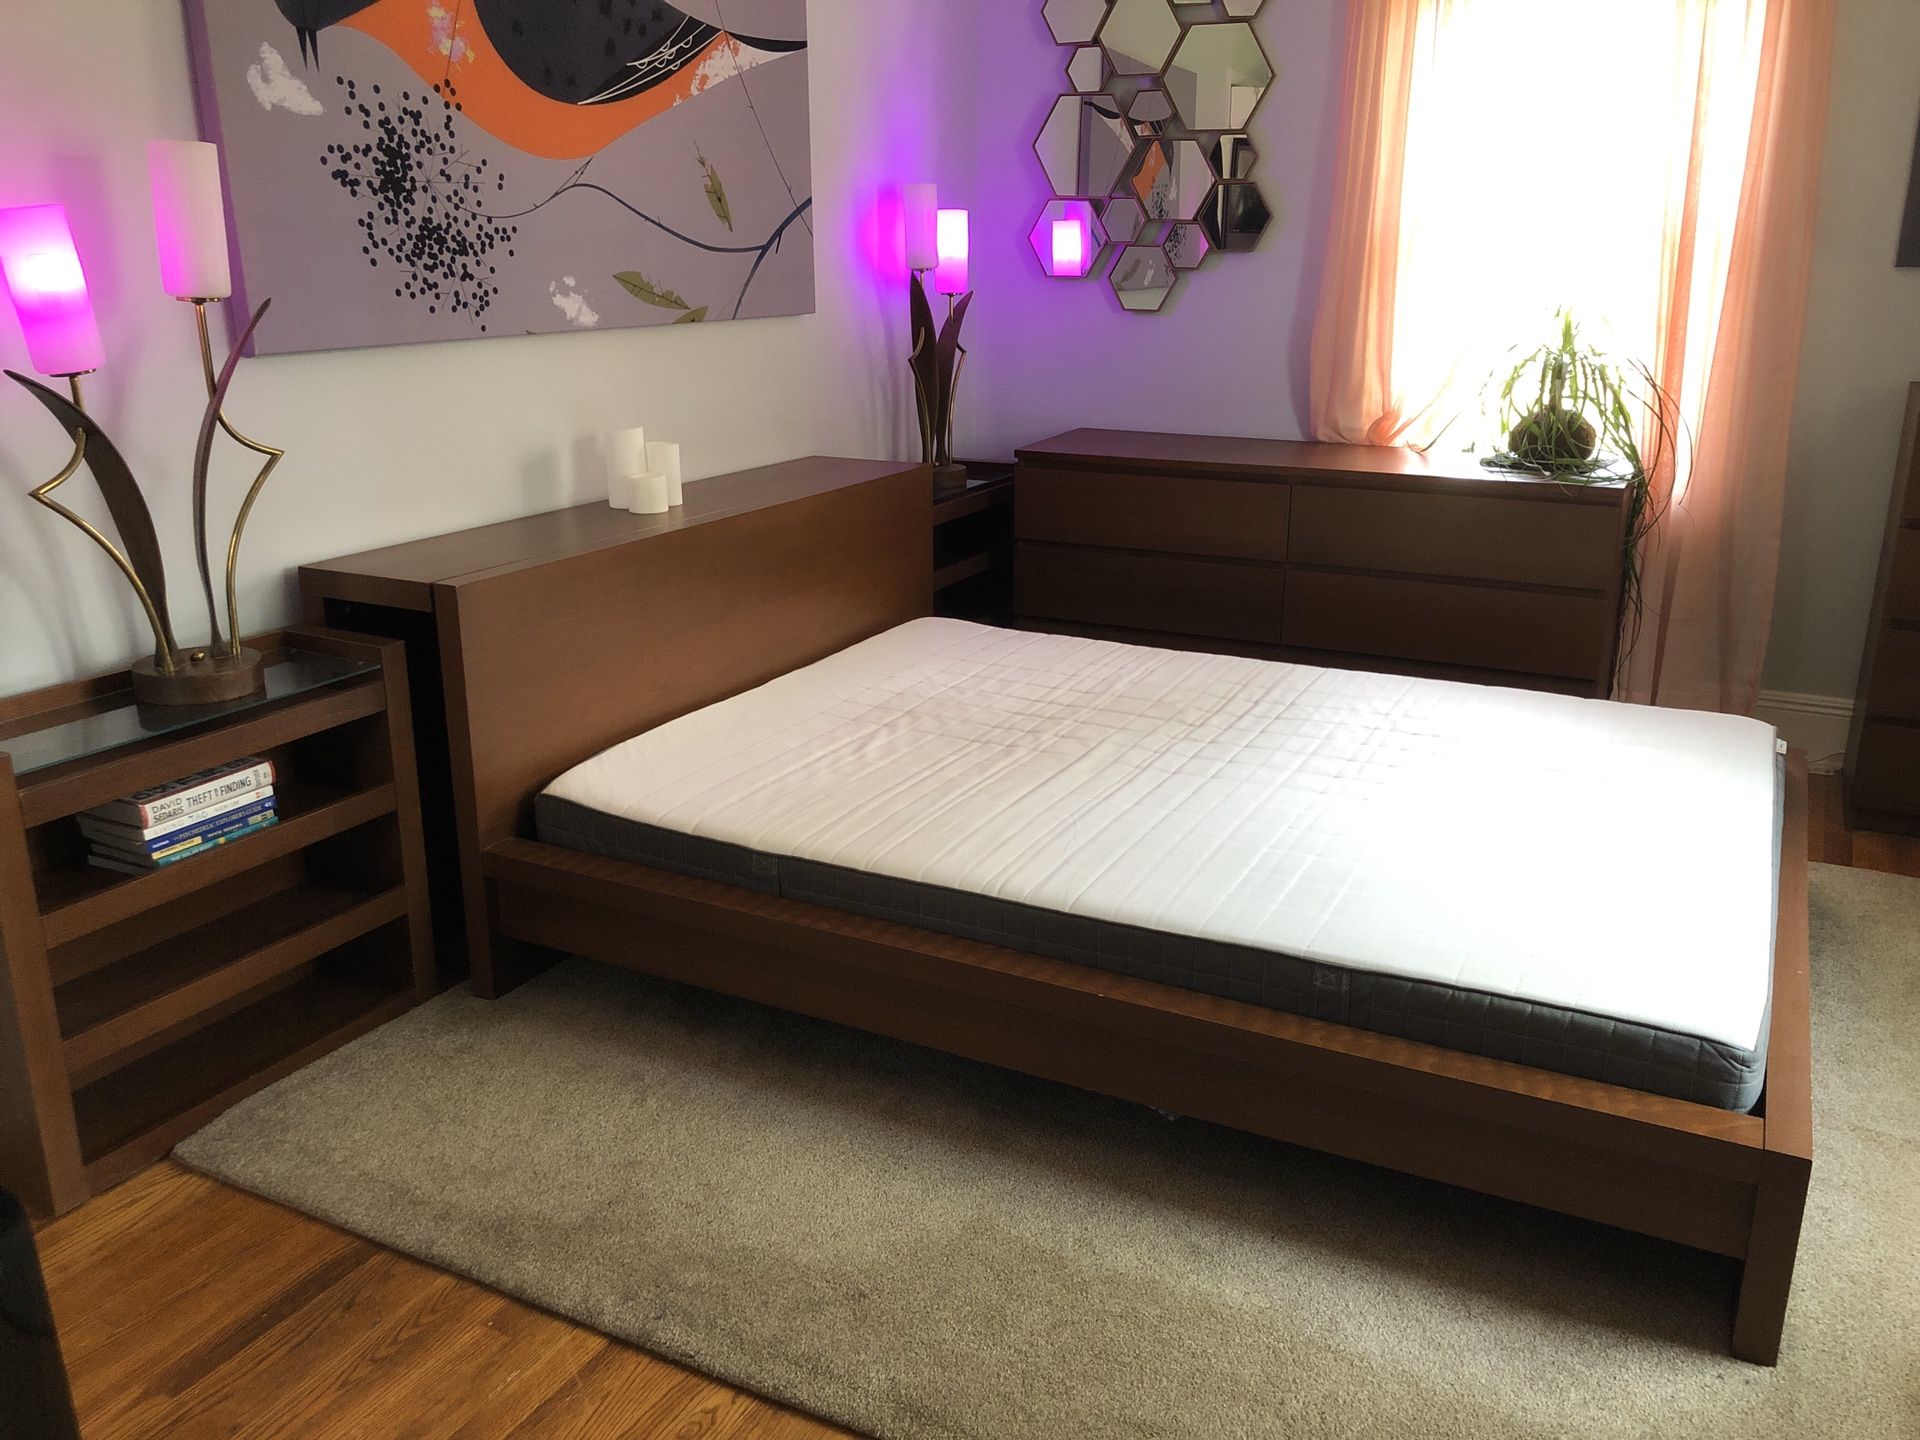 IKEA Malm Queen Bed with New Clean Mattress